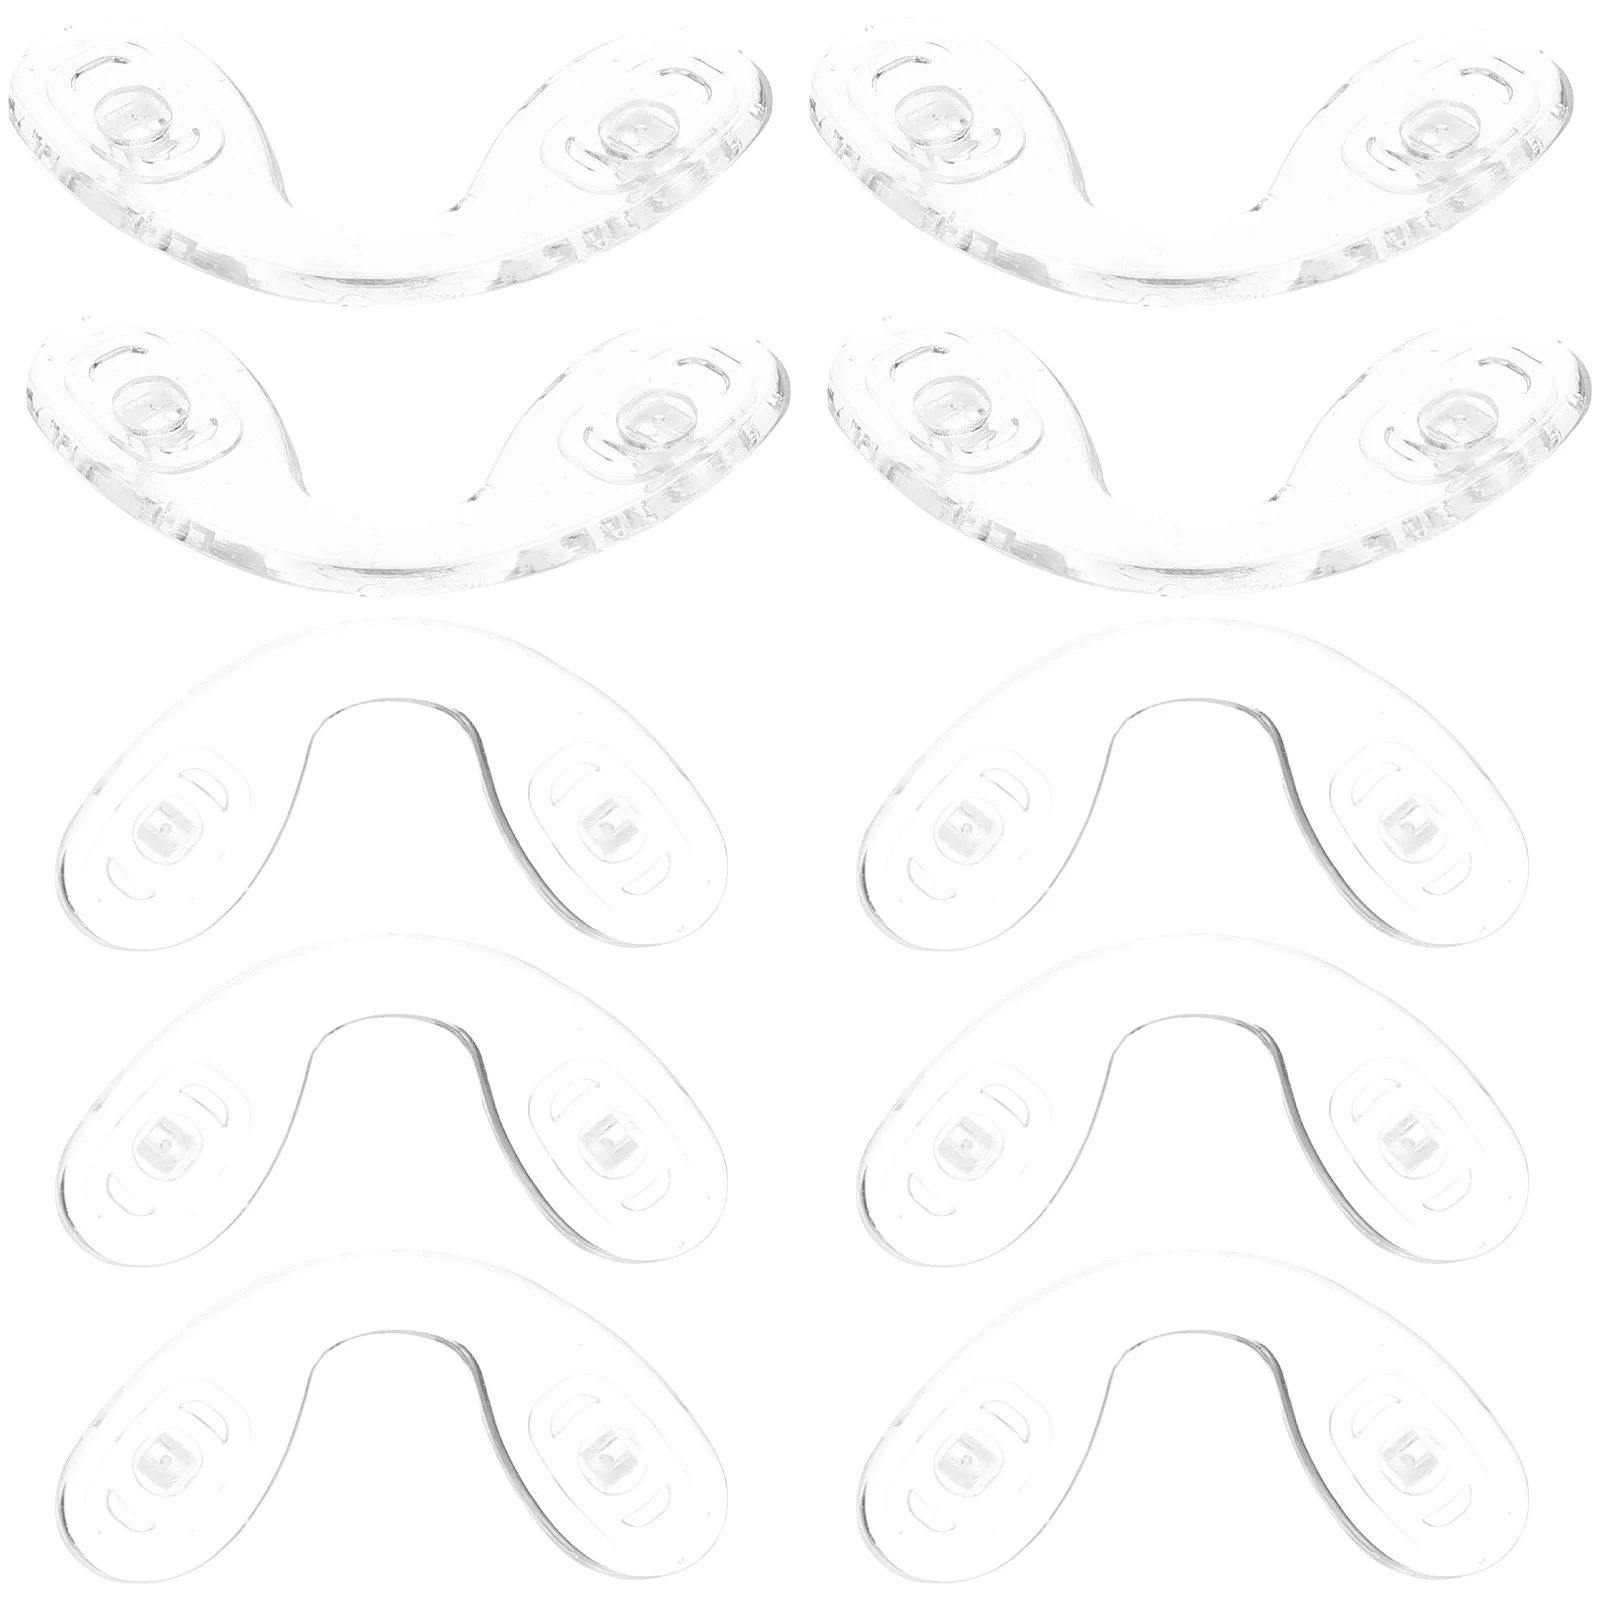 

10 Pcs Non-slip Mat Glasses Silicone Nose Pads Eyeglass Accessories Silica Gel Guards for Eyeglasses